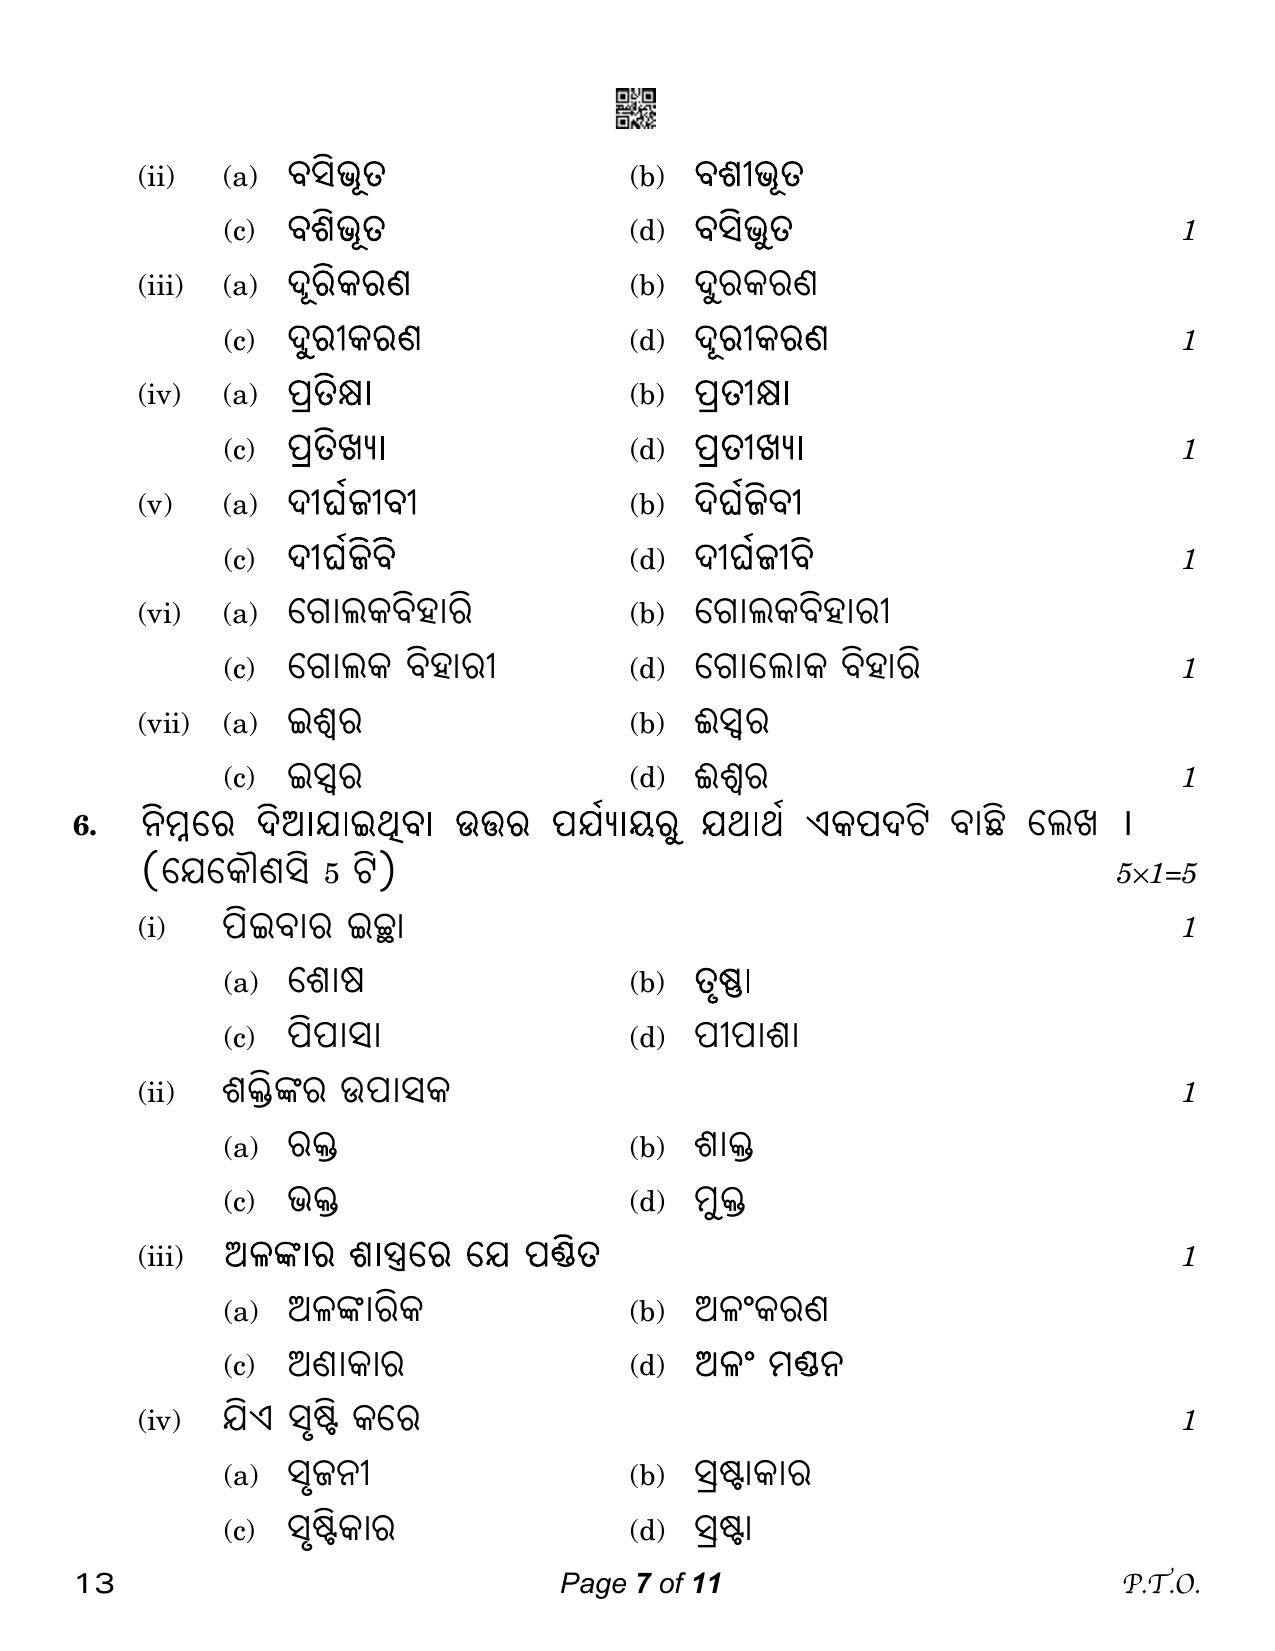 CBSE Class 12 Odia (Compartment) 2023 Question Paper - Page 7